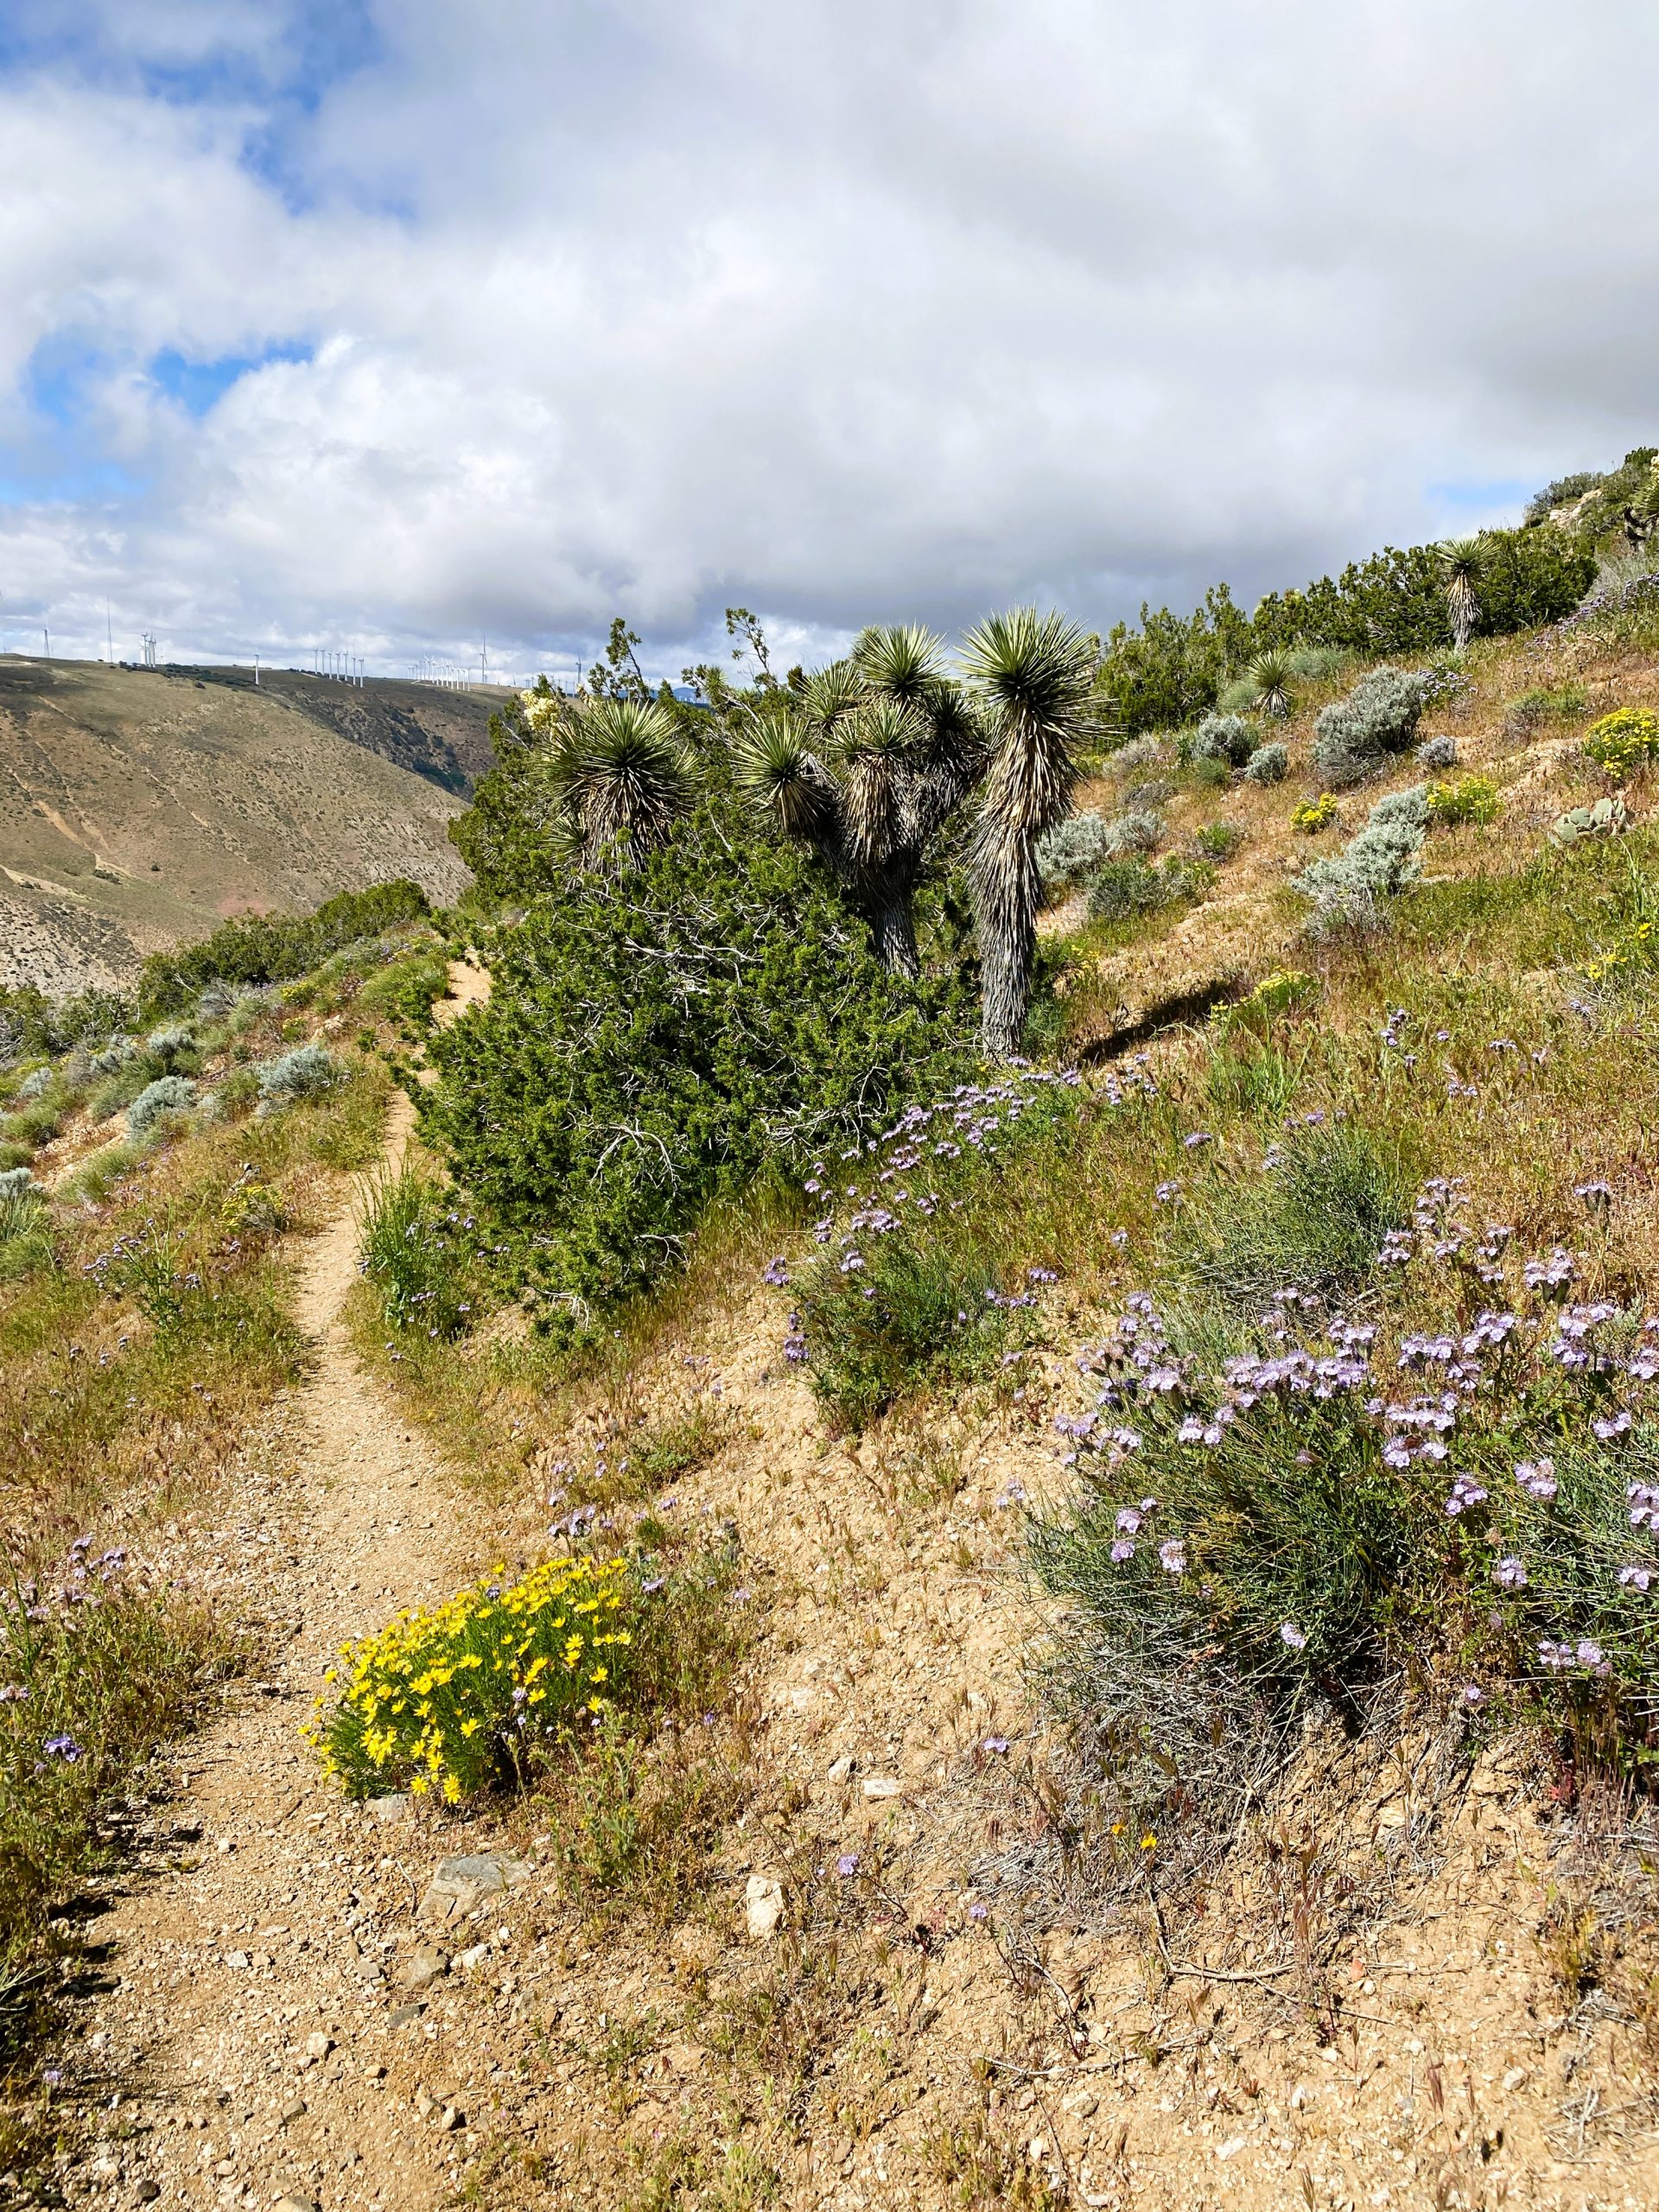  PCT Trail Journal: Day 23 Mile 597.3 to 578.1 joshua trees